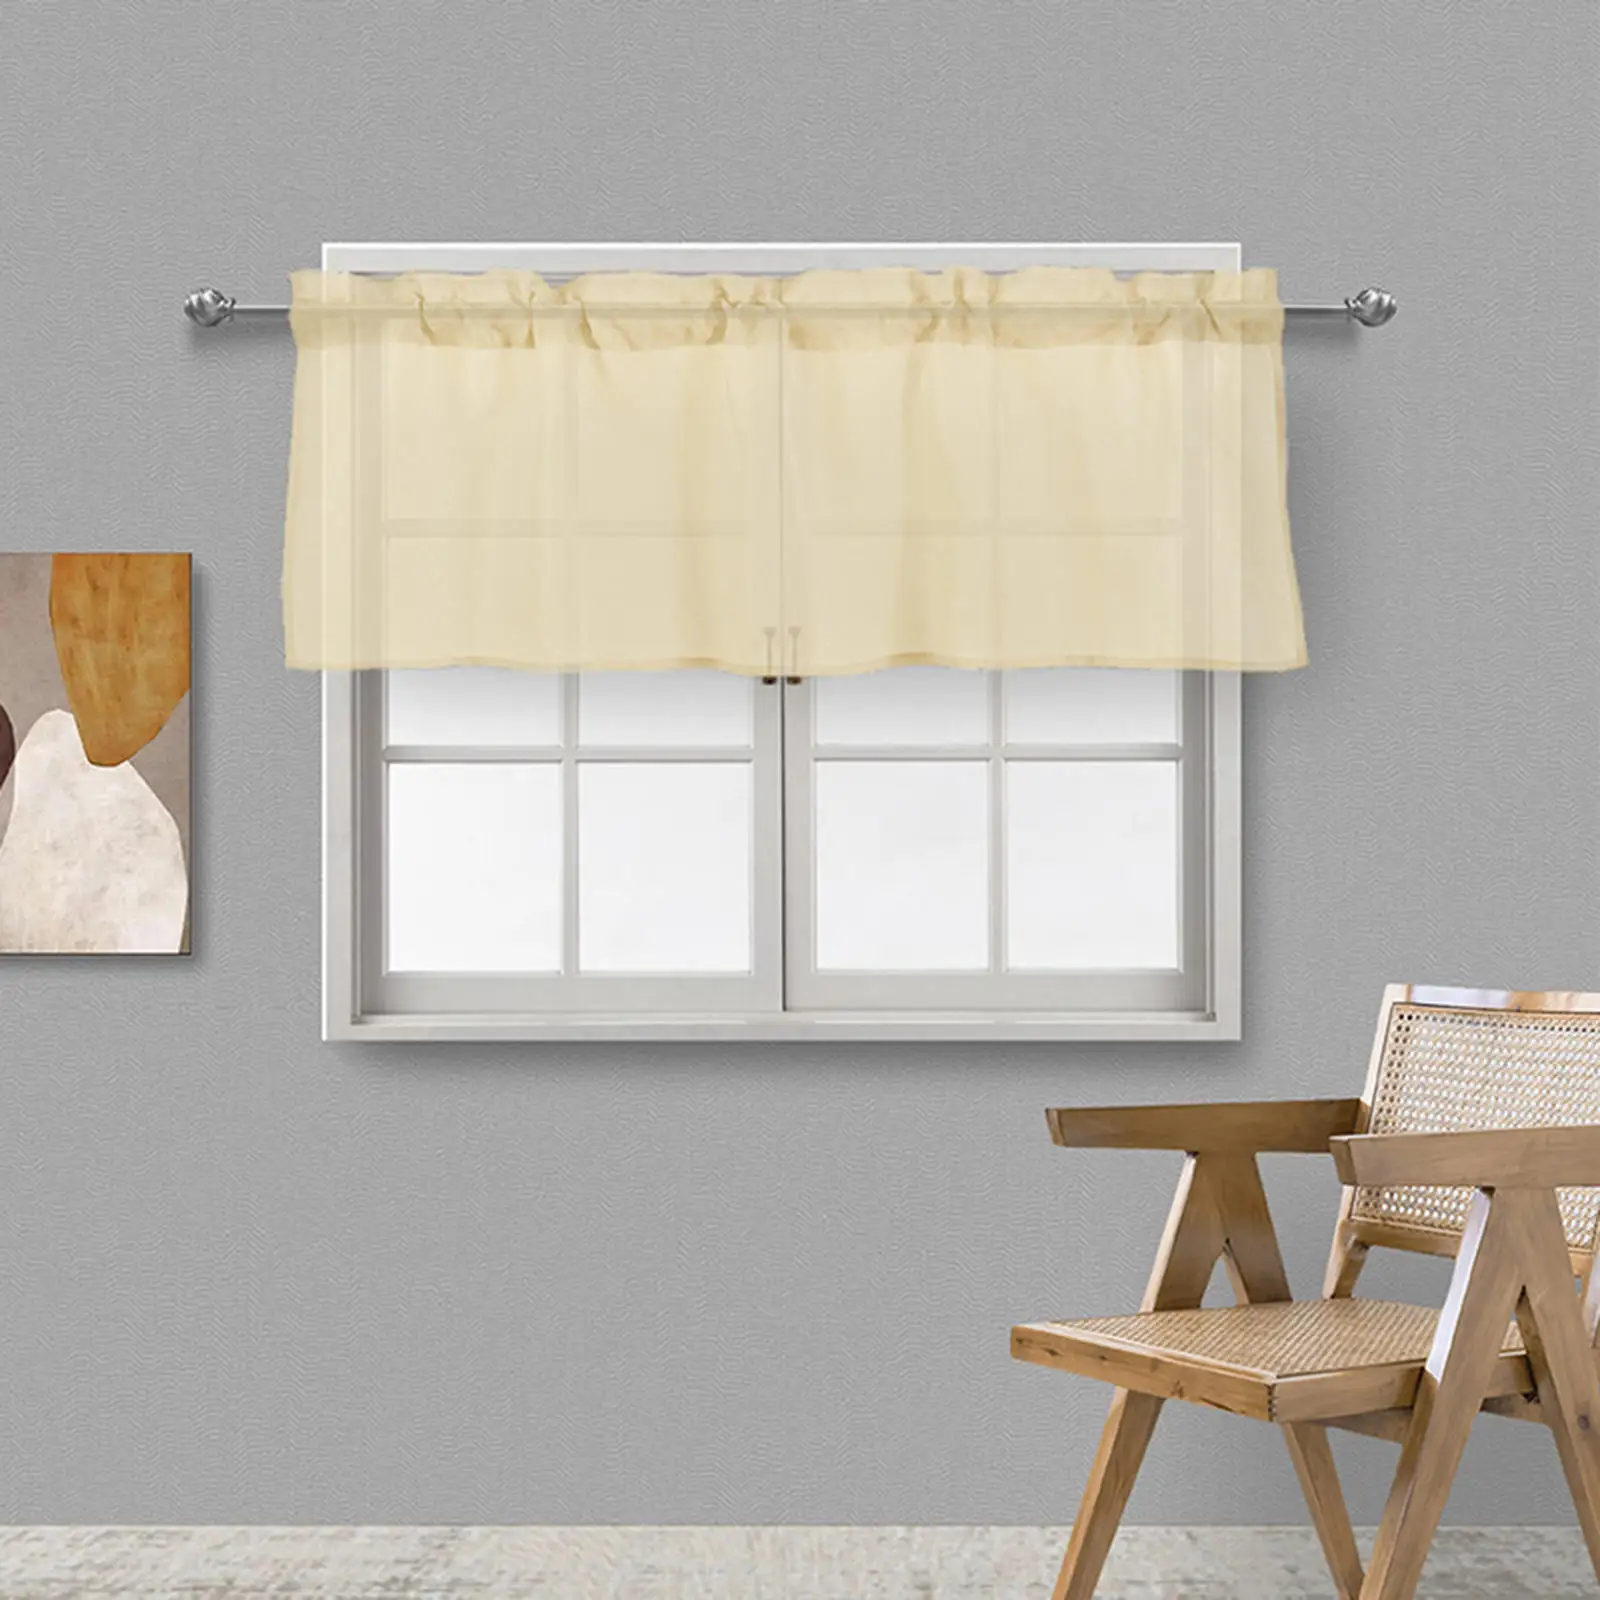 Soft Valances Rod Drapes Polyester for Balconies Bedroom Bathroom